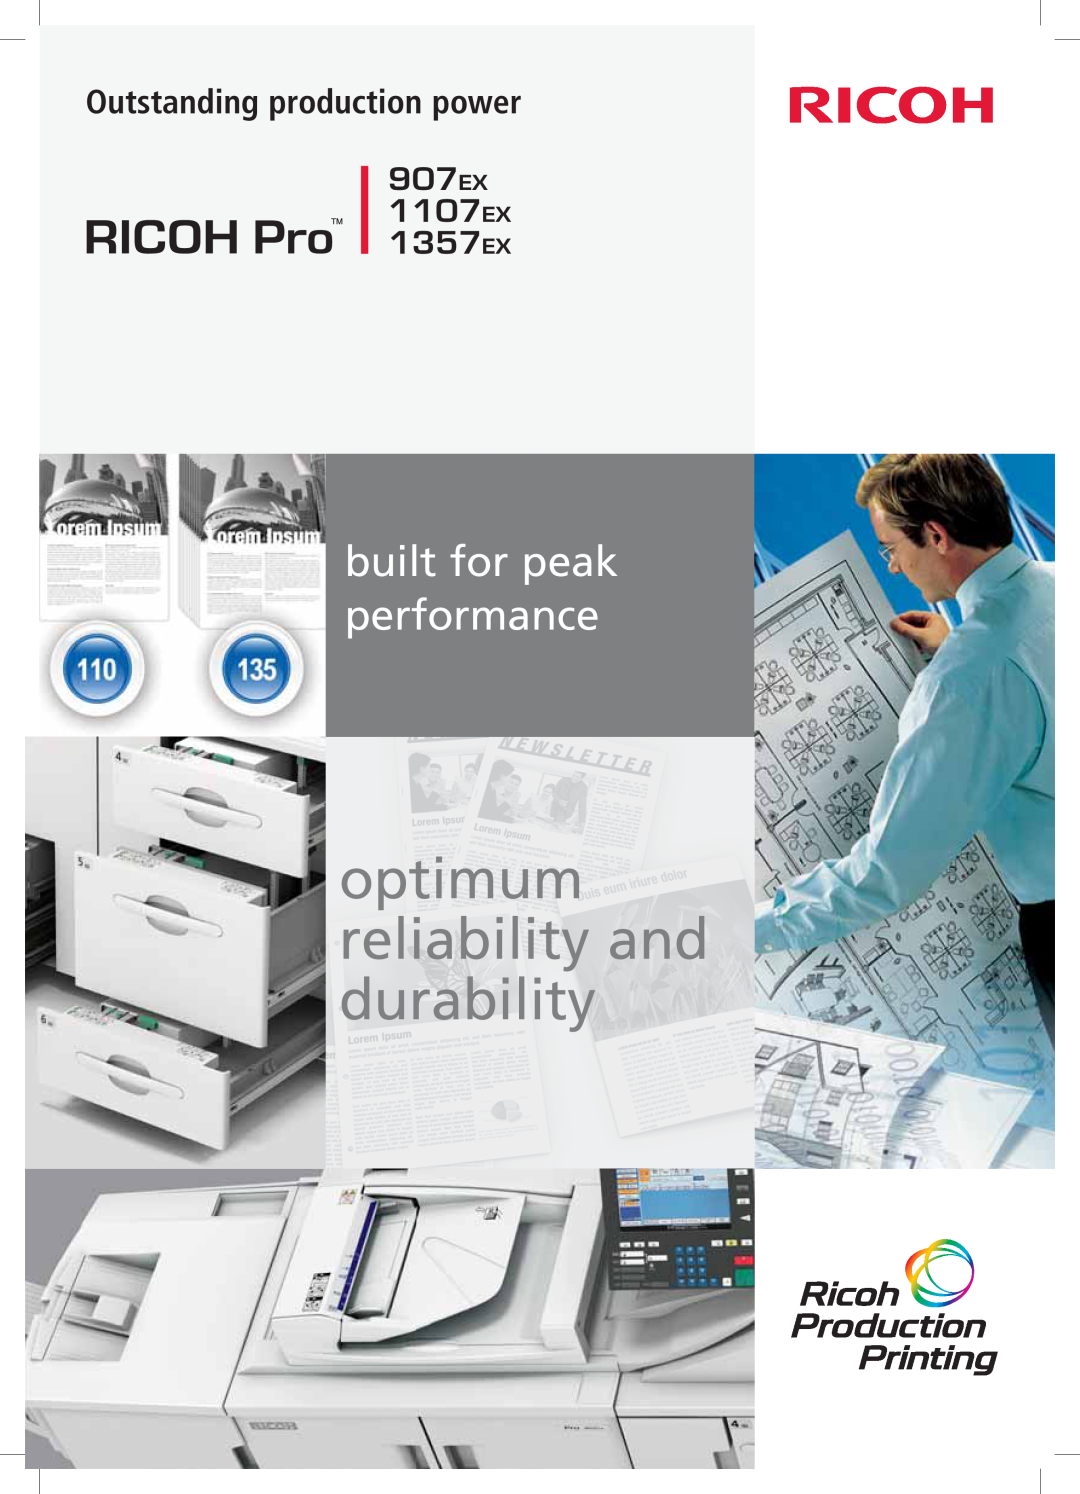 Ricoh 1107EX, 907EX manual optimum reliability and durability, built for peak performance, Outstanding production power 